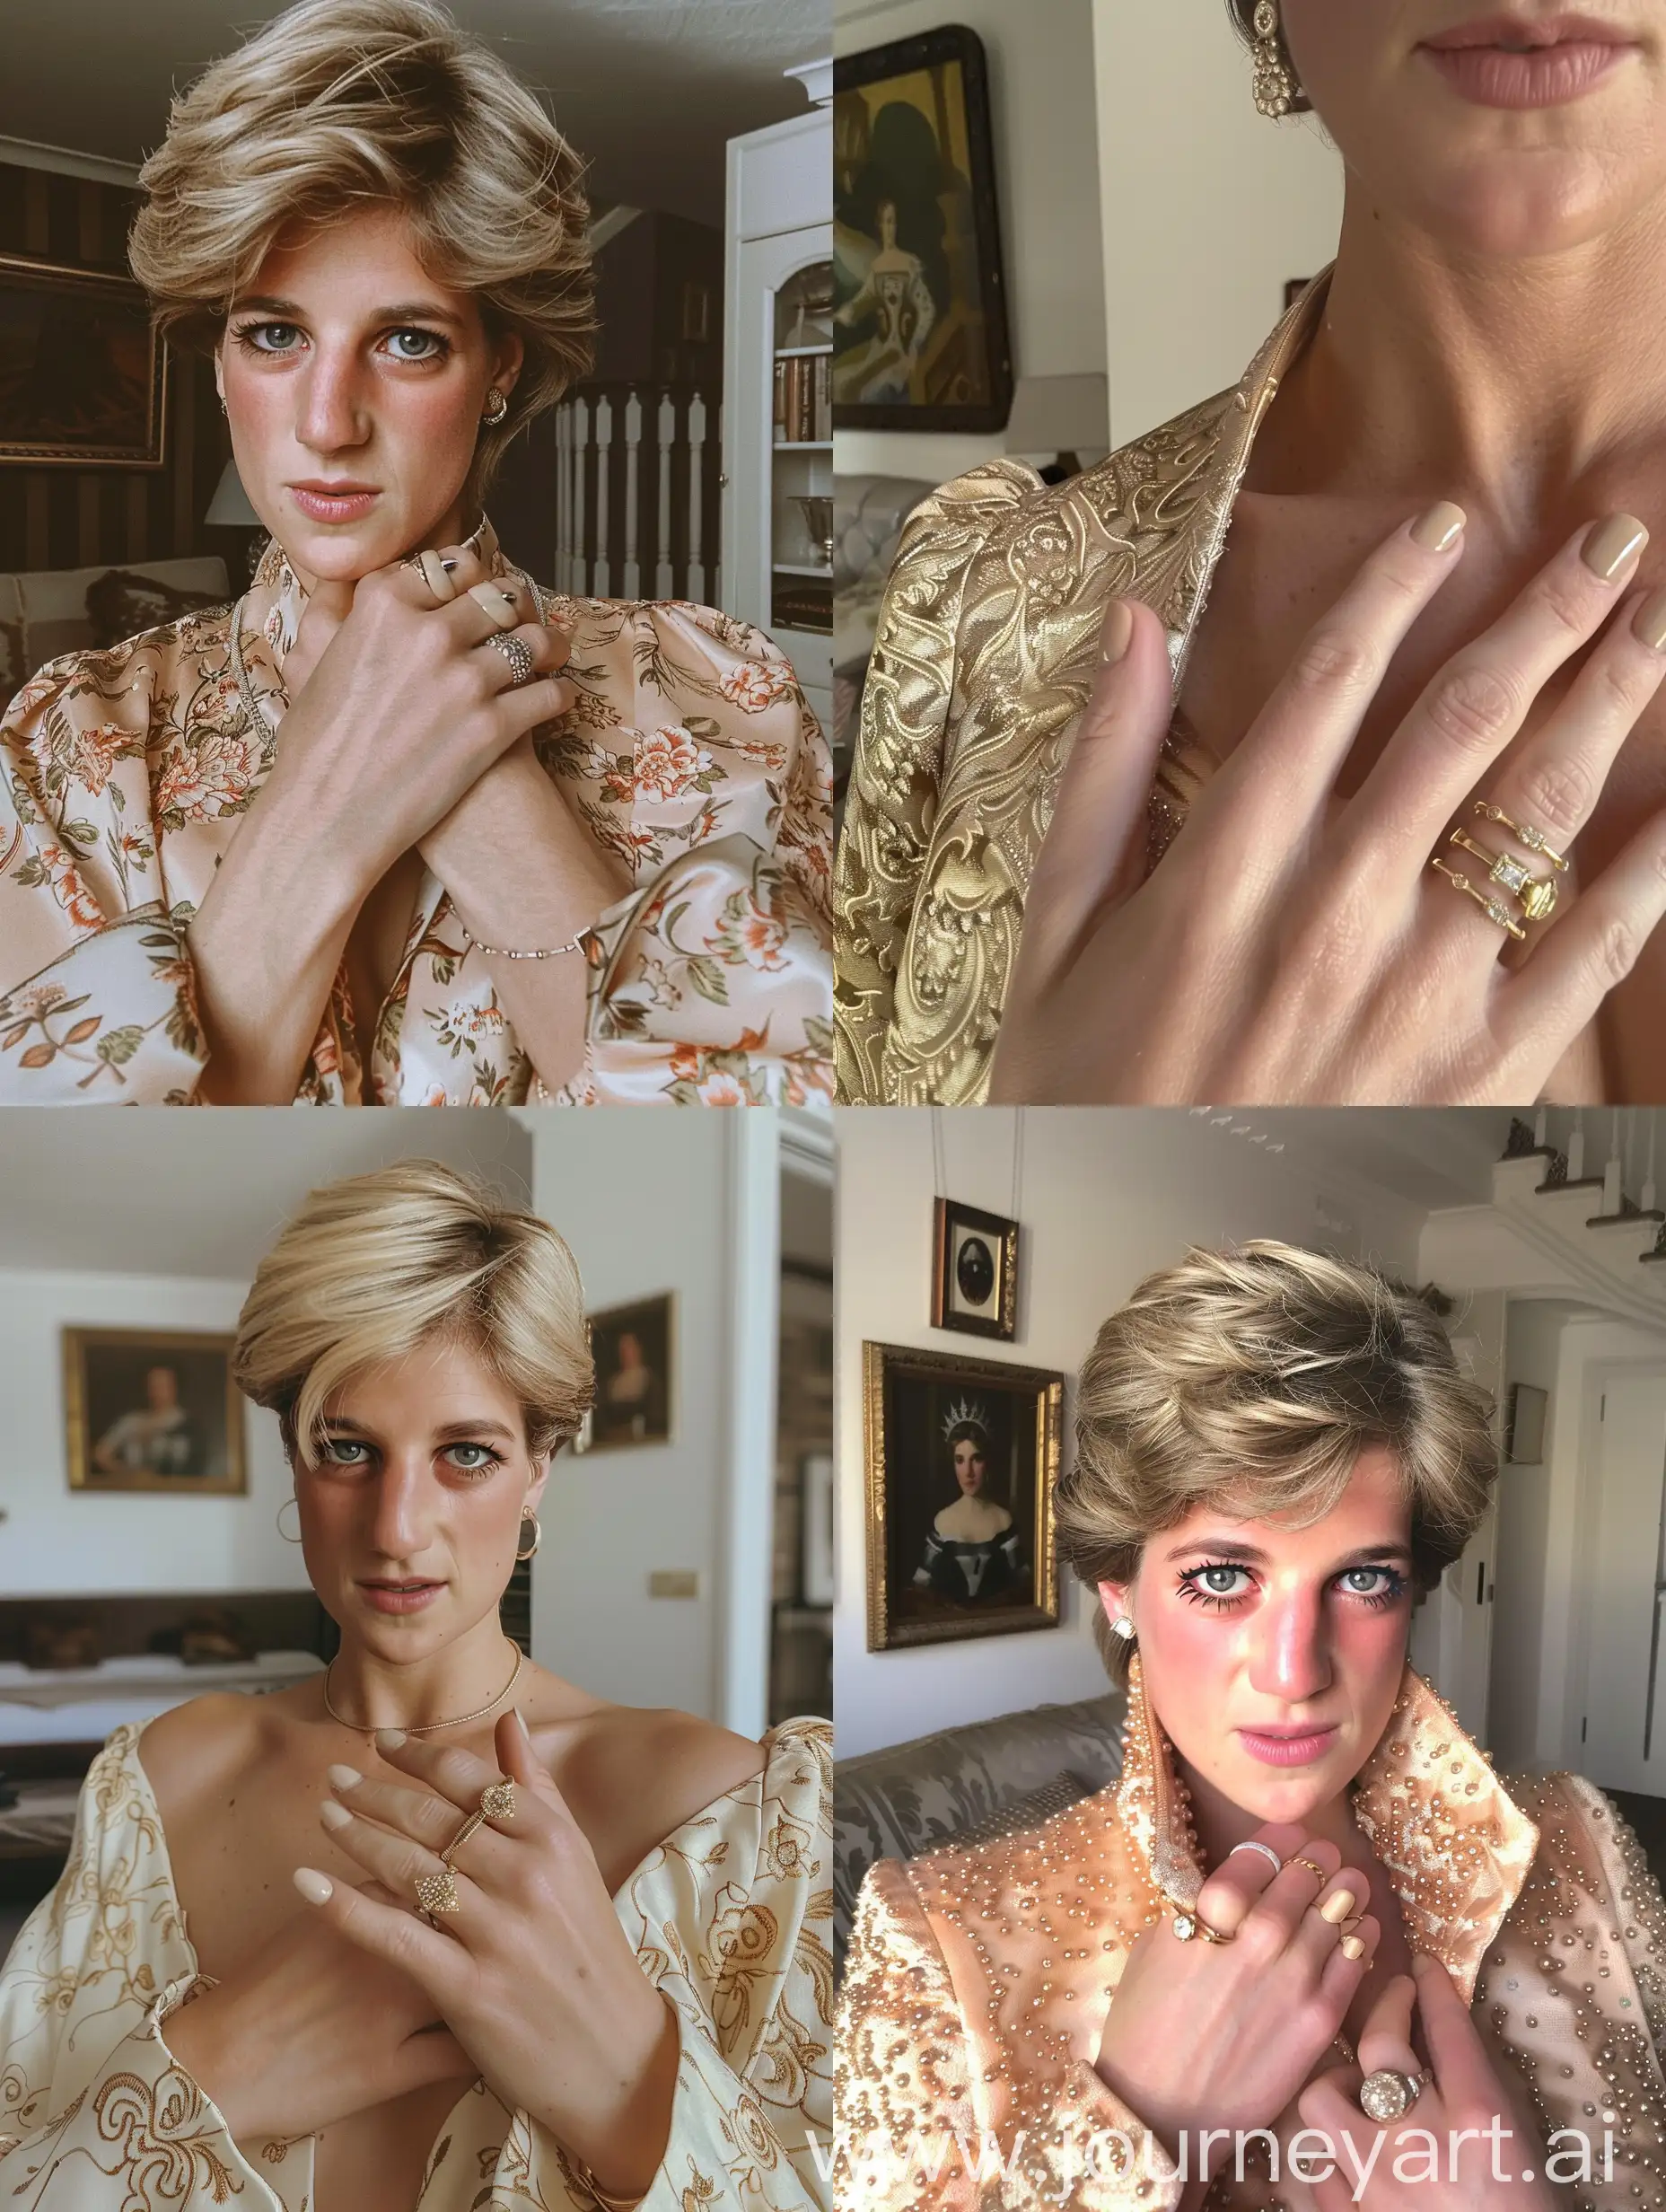 Aesthetic Instagram selfie of princess Diana wearing modern clothes, in a modern London flat, close up selfie, manicured, beige gel nail polish, one hand gripping chest, rings